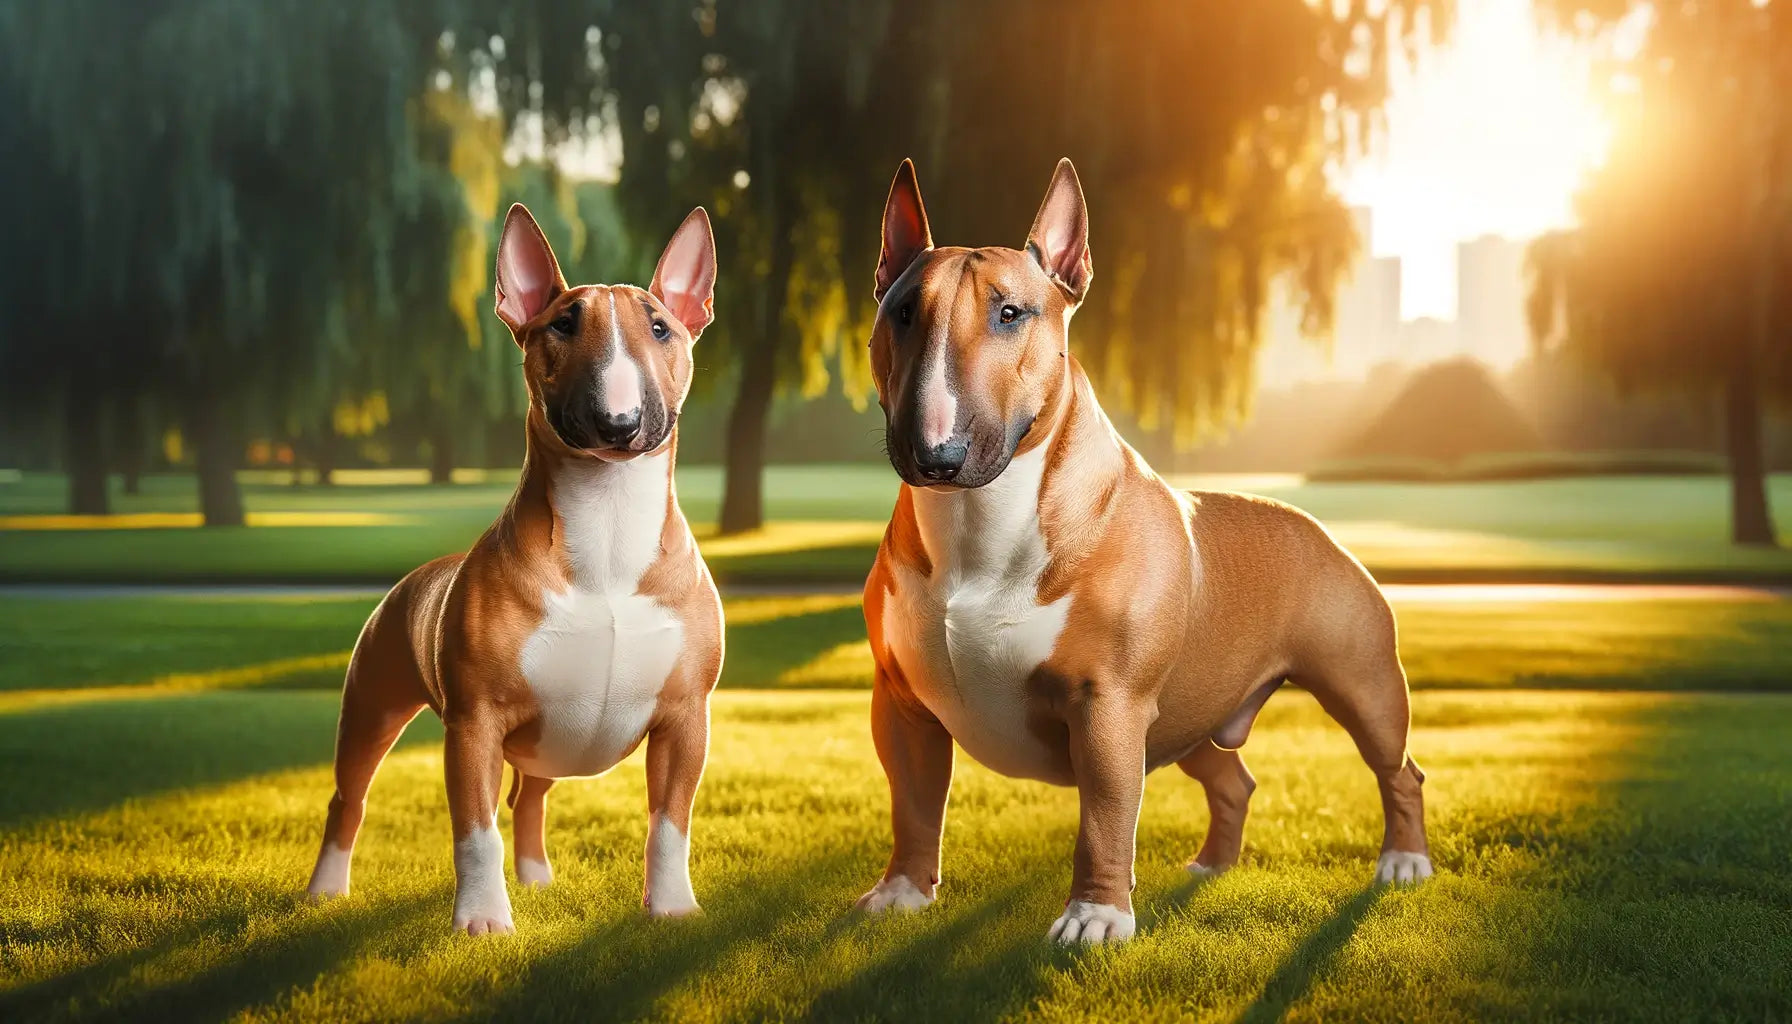 A male and a female Bull Terrier stand side by side in a sunny park, showcasing the differences between the sexes.